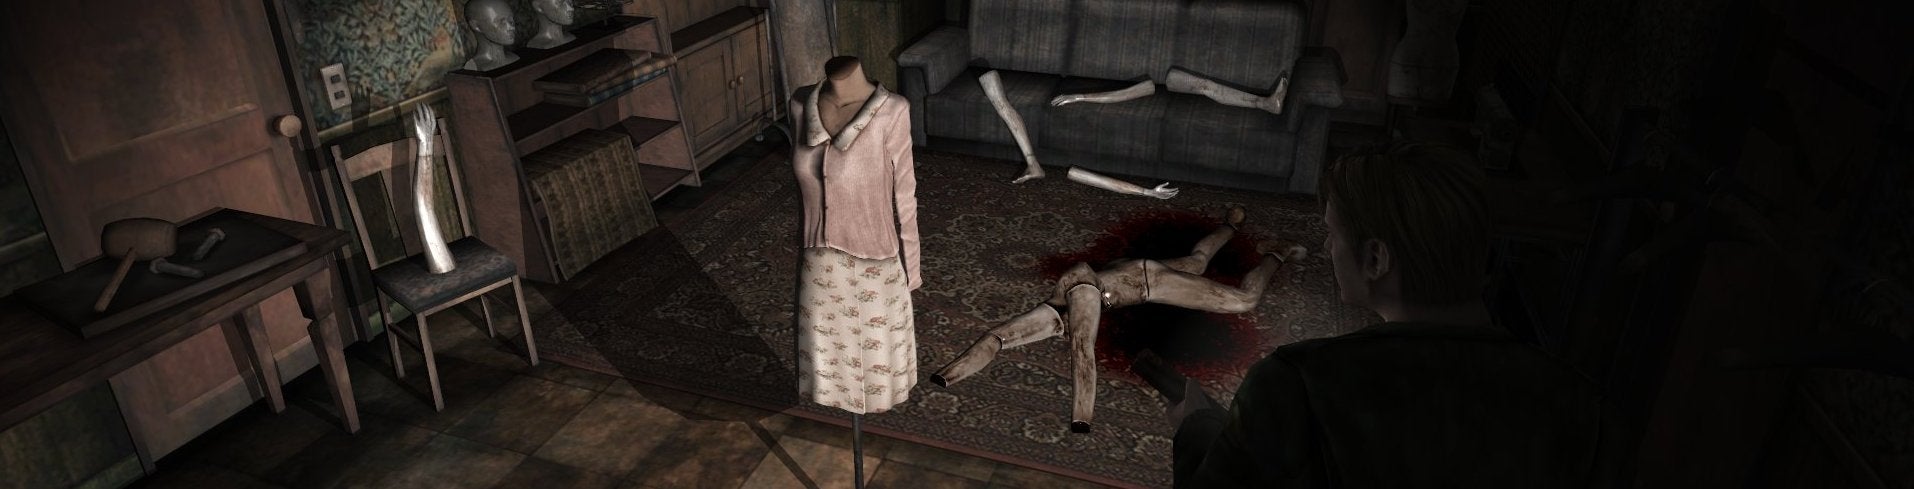 Image for Watch: Chris faces the horror of tank controls in Silent Hill 2